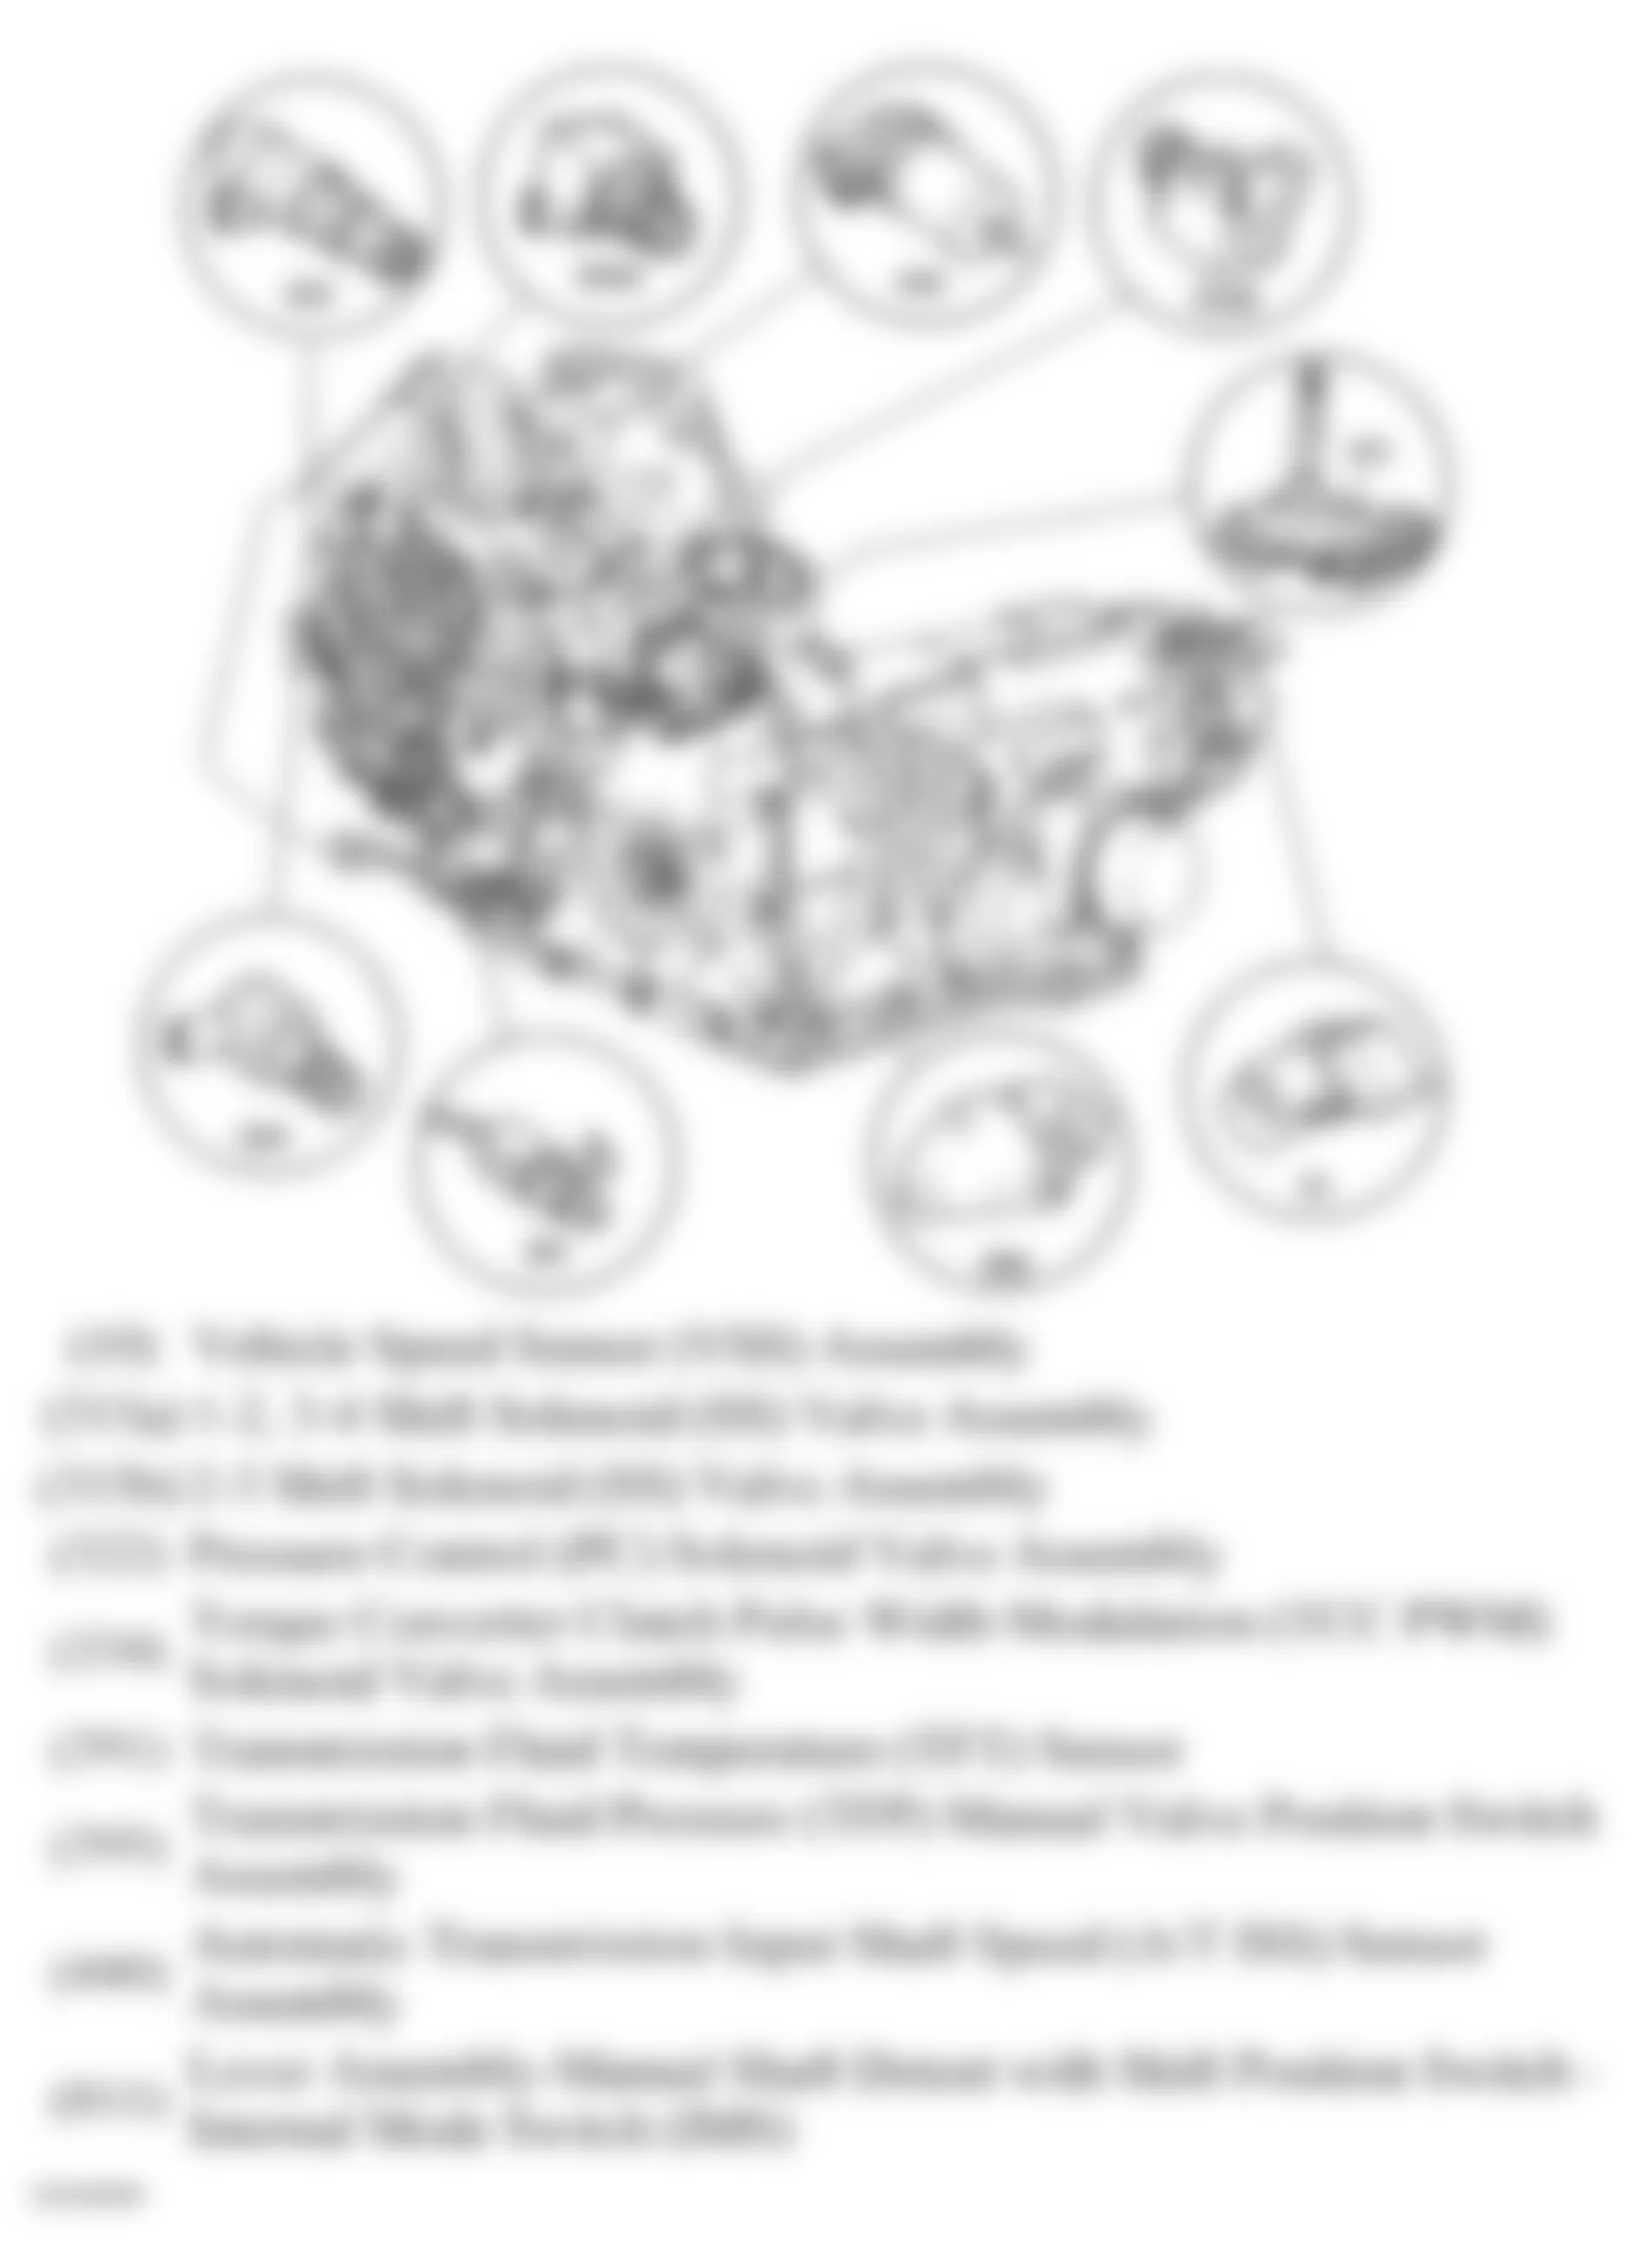 Buick Rendezvous CXL 2007 - Component Locations -  Transmission Assembly